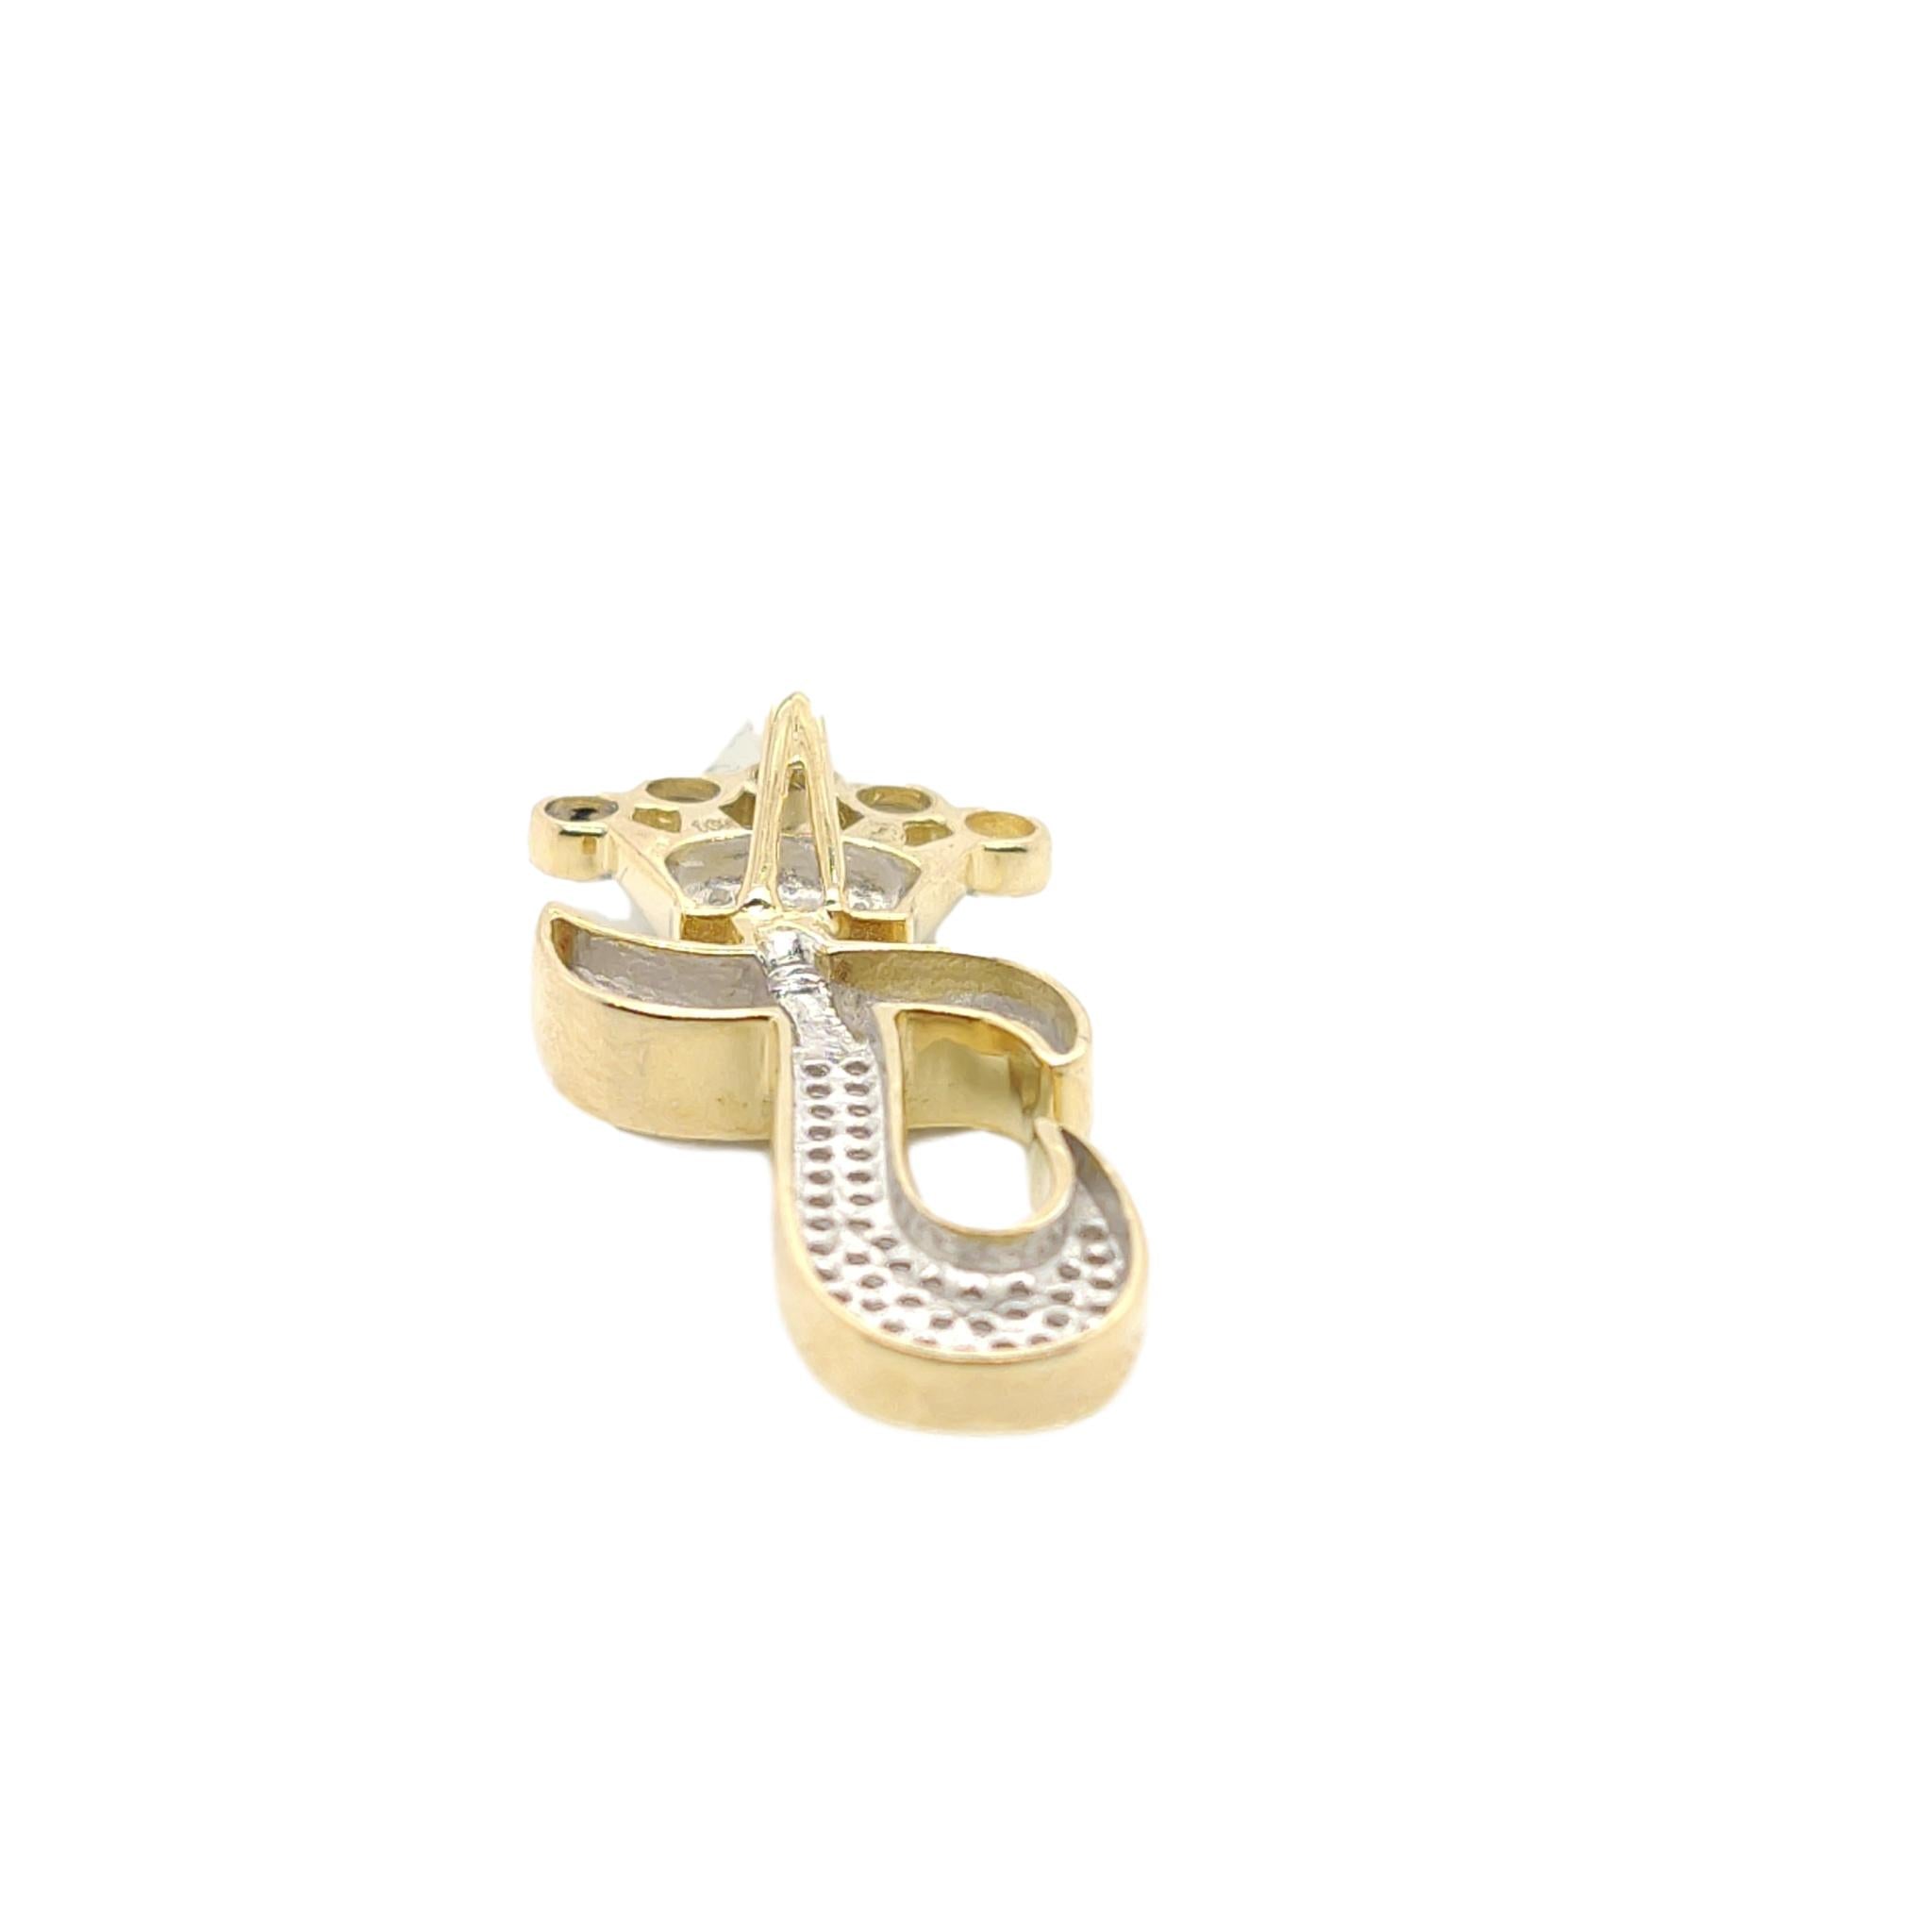 10K Yellow Gold Diamond J Letter Charm with Crown Small Size